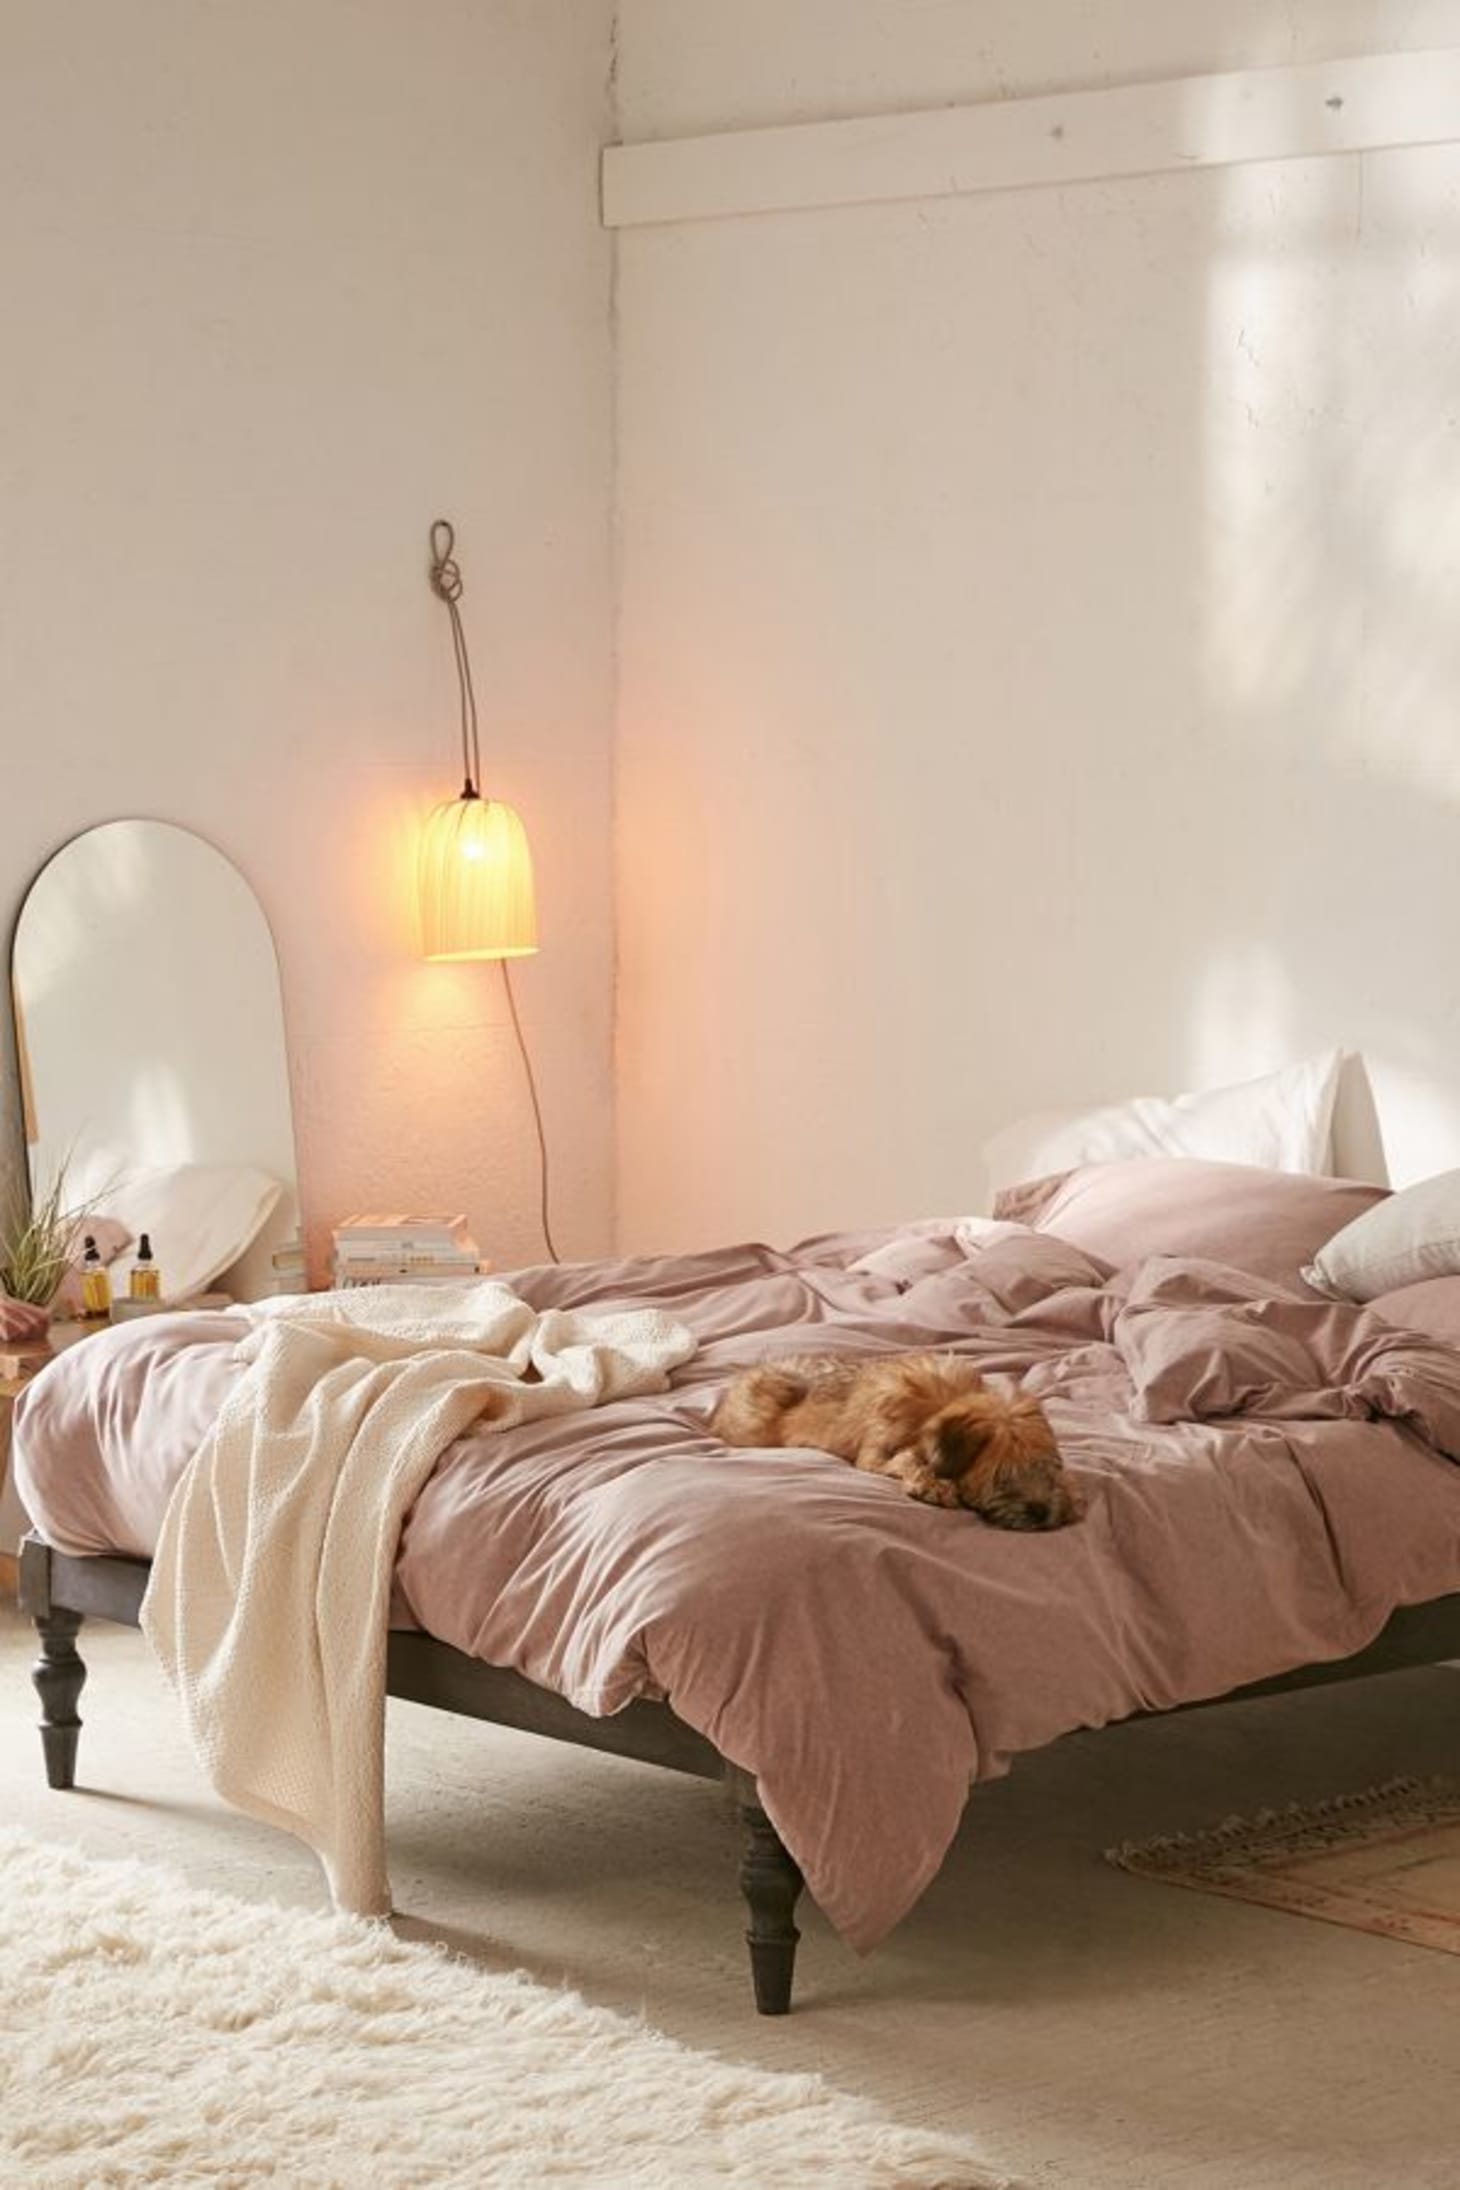 Urban Outfitters Home Sale February 2020 Apartment Therapy